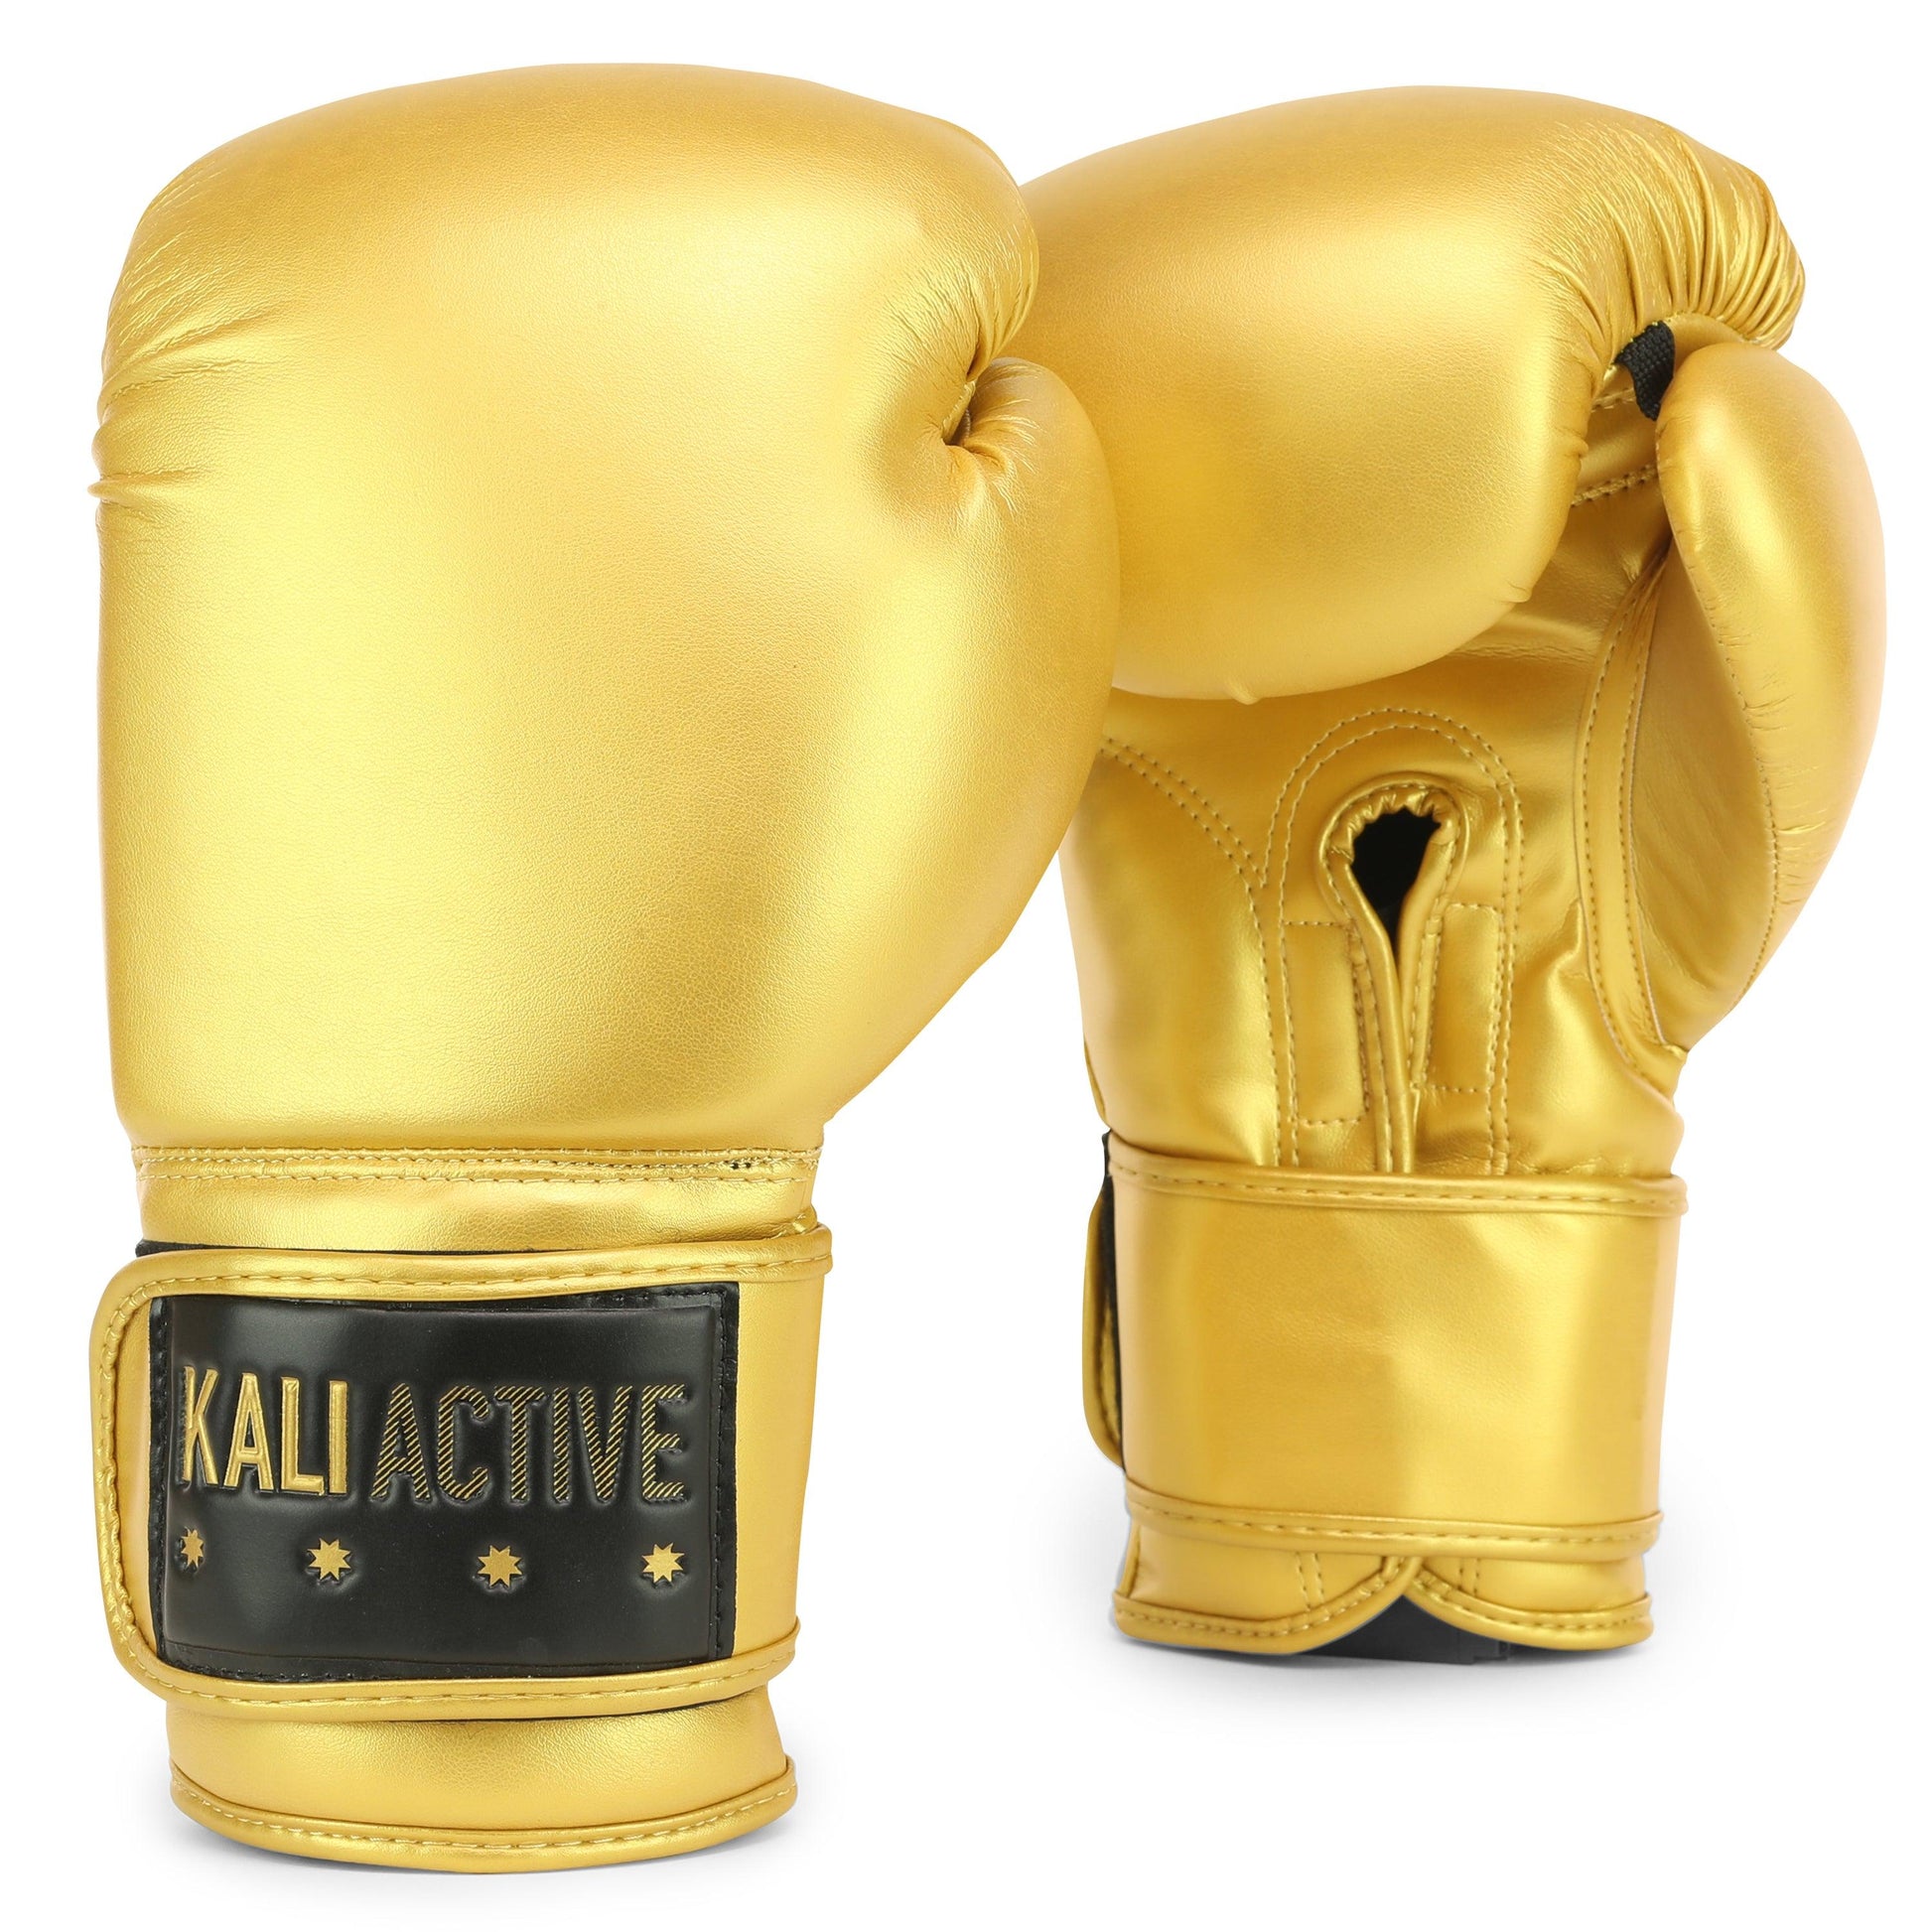 Boxing Gloves (13 photos) - Photography and Web Design - Los Angeles, US based Shopify Experts Revo Designs